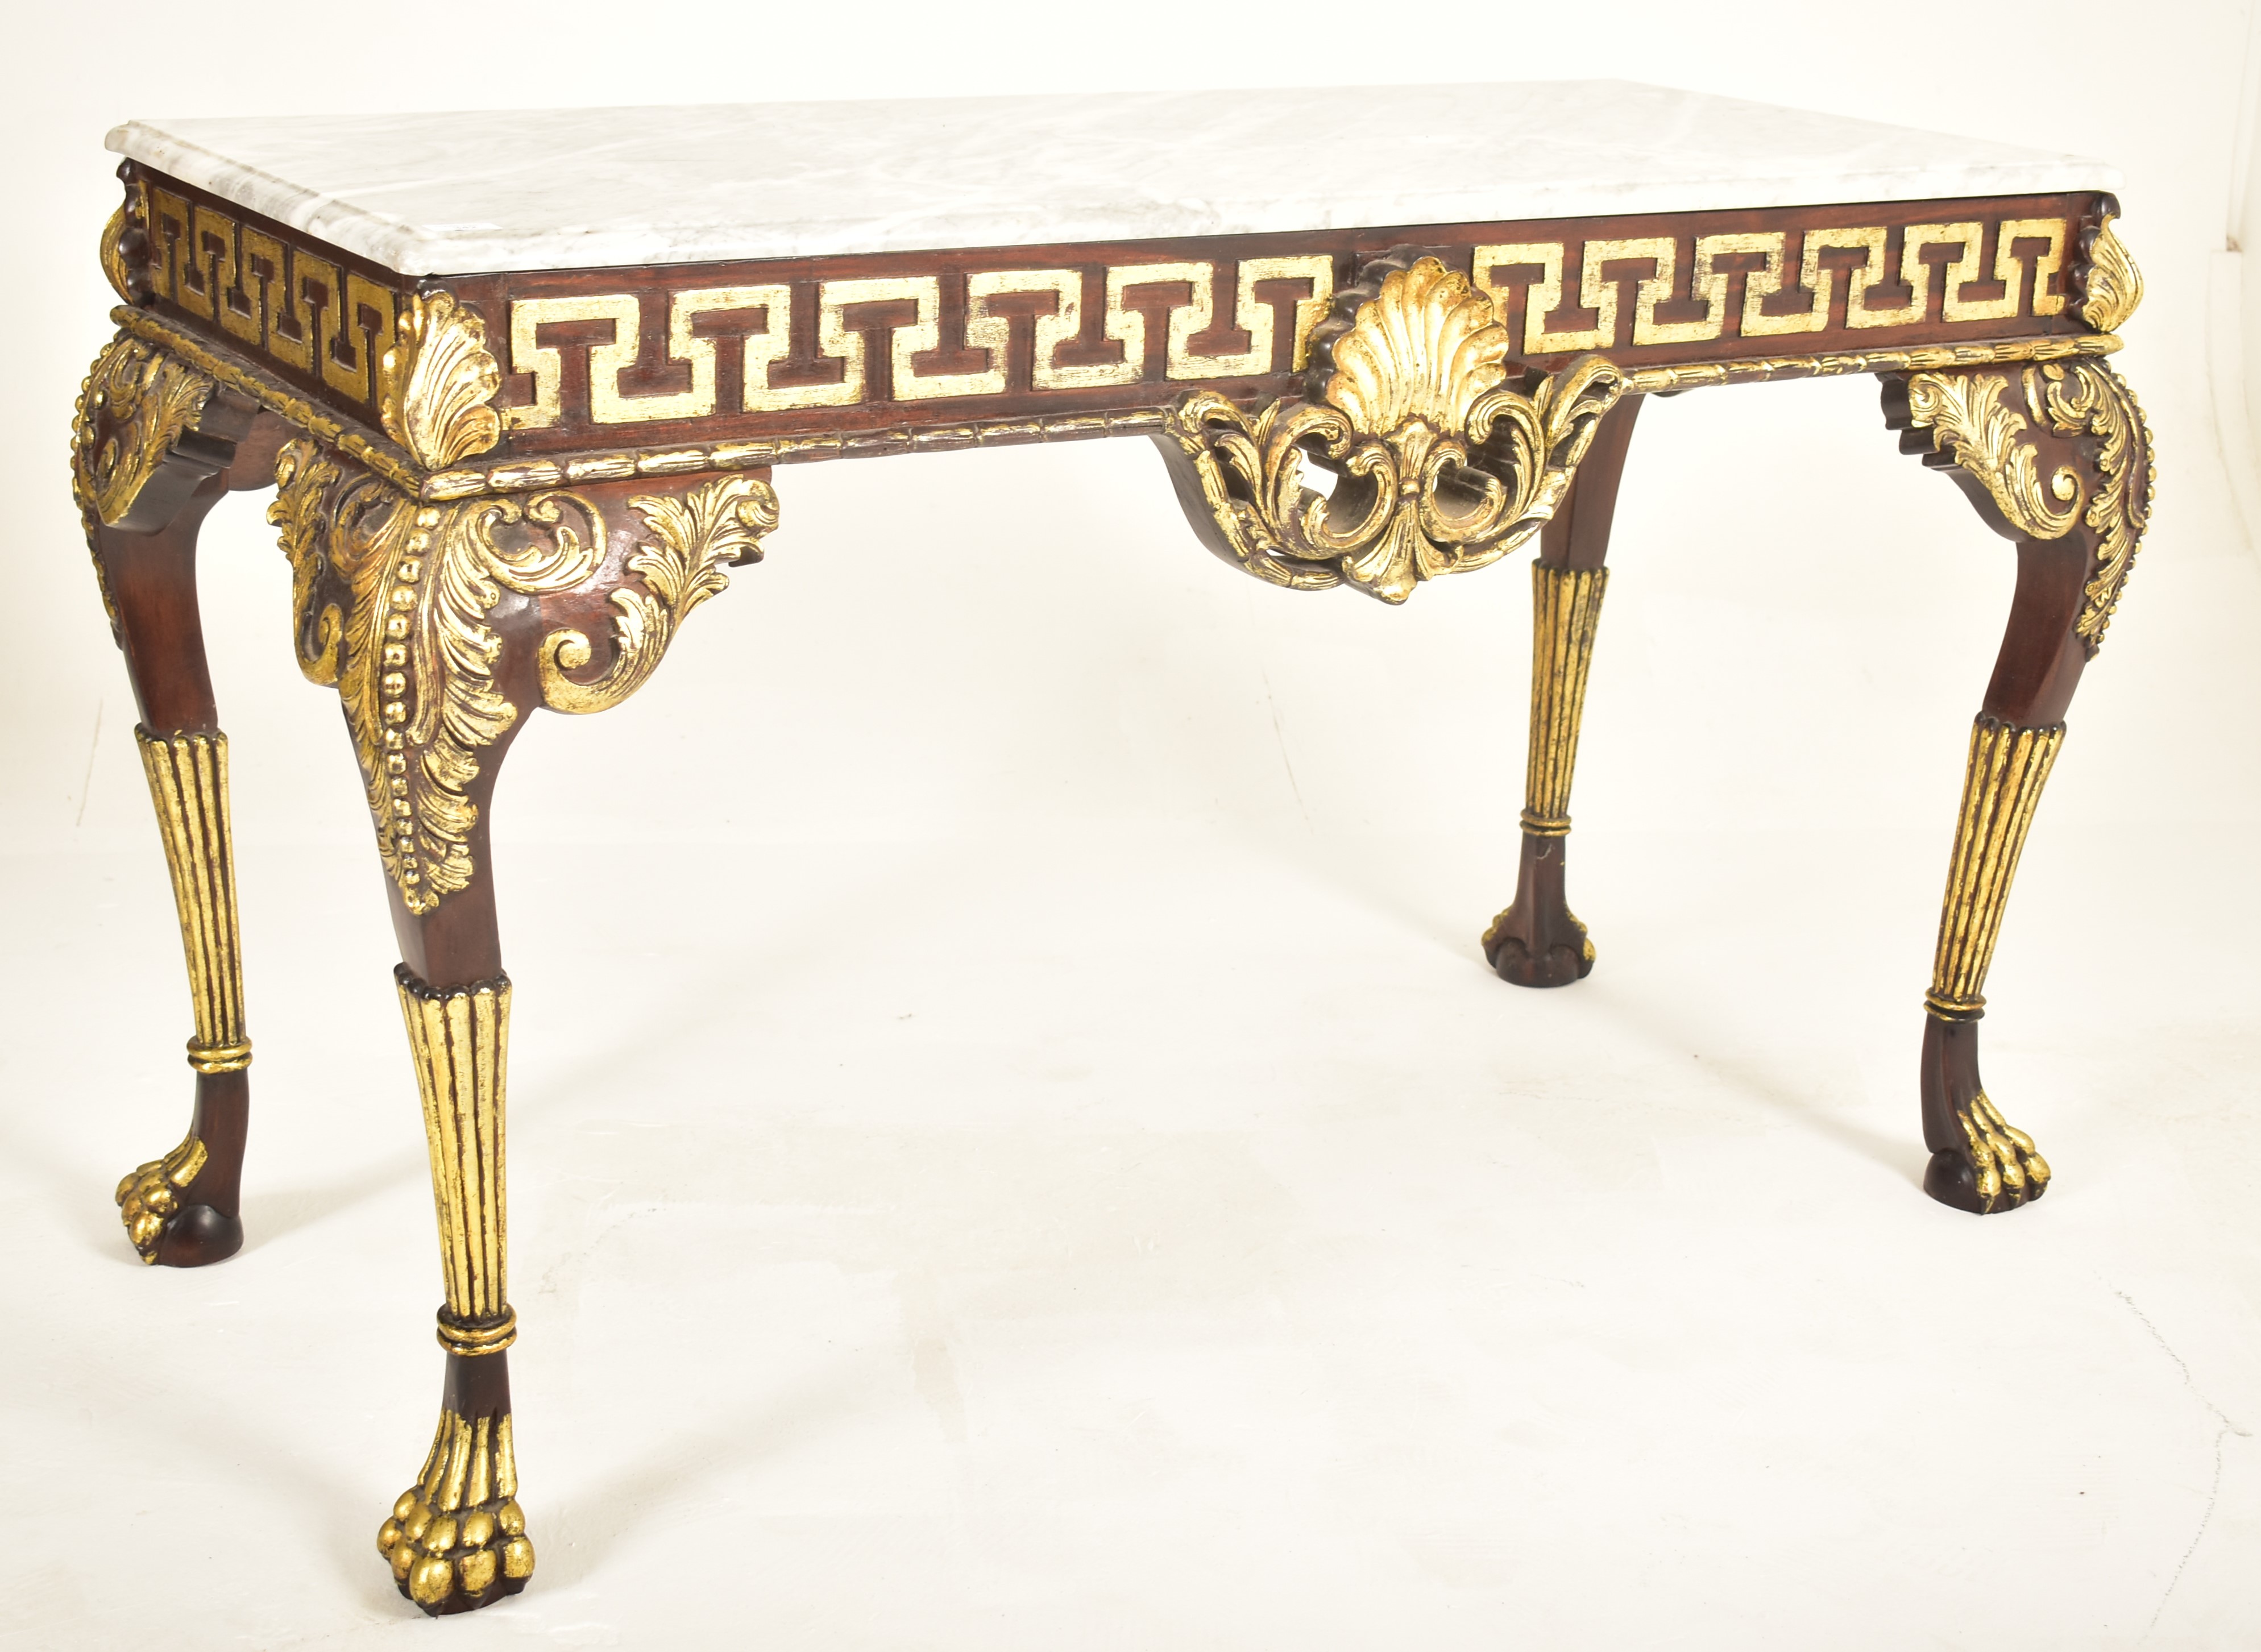 WILLIAM KENT 18TH CENTURY INSPIRED GILT WOOD & MARBLE HALL TABLE - Image 2 of 8